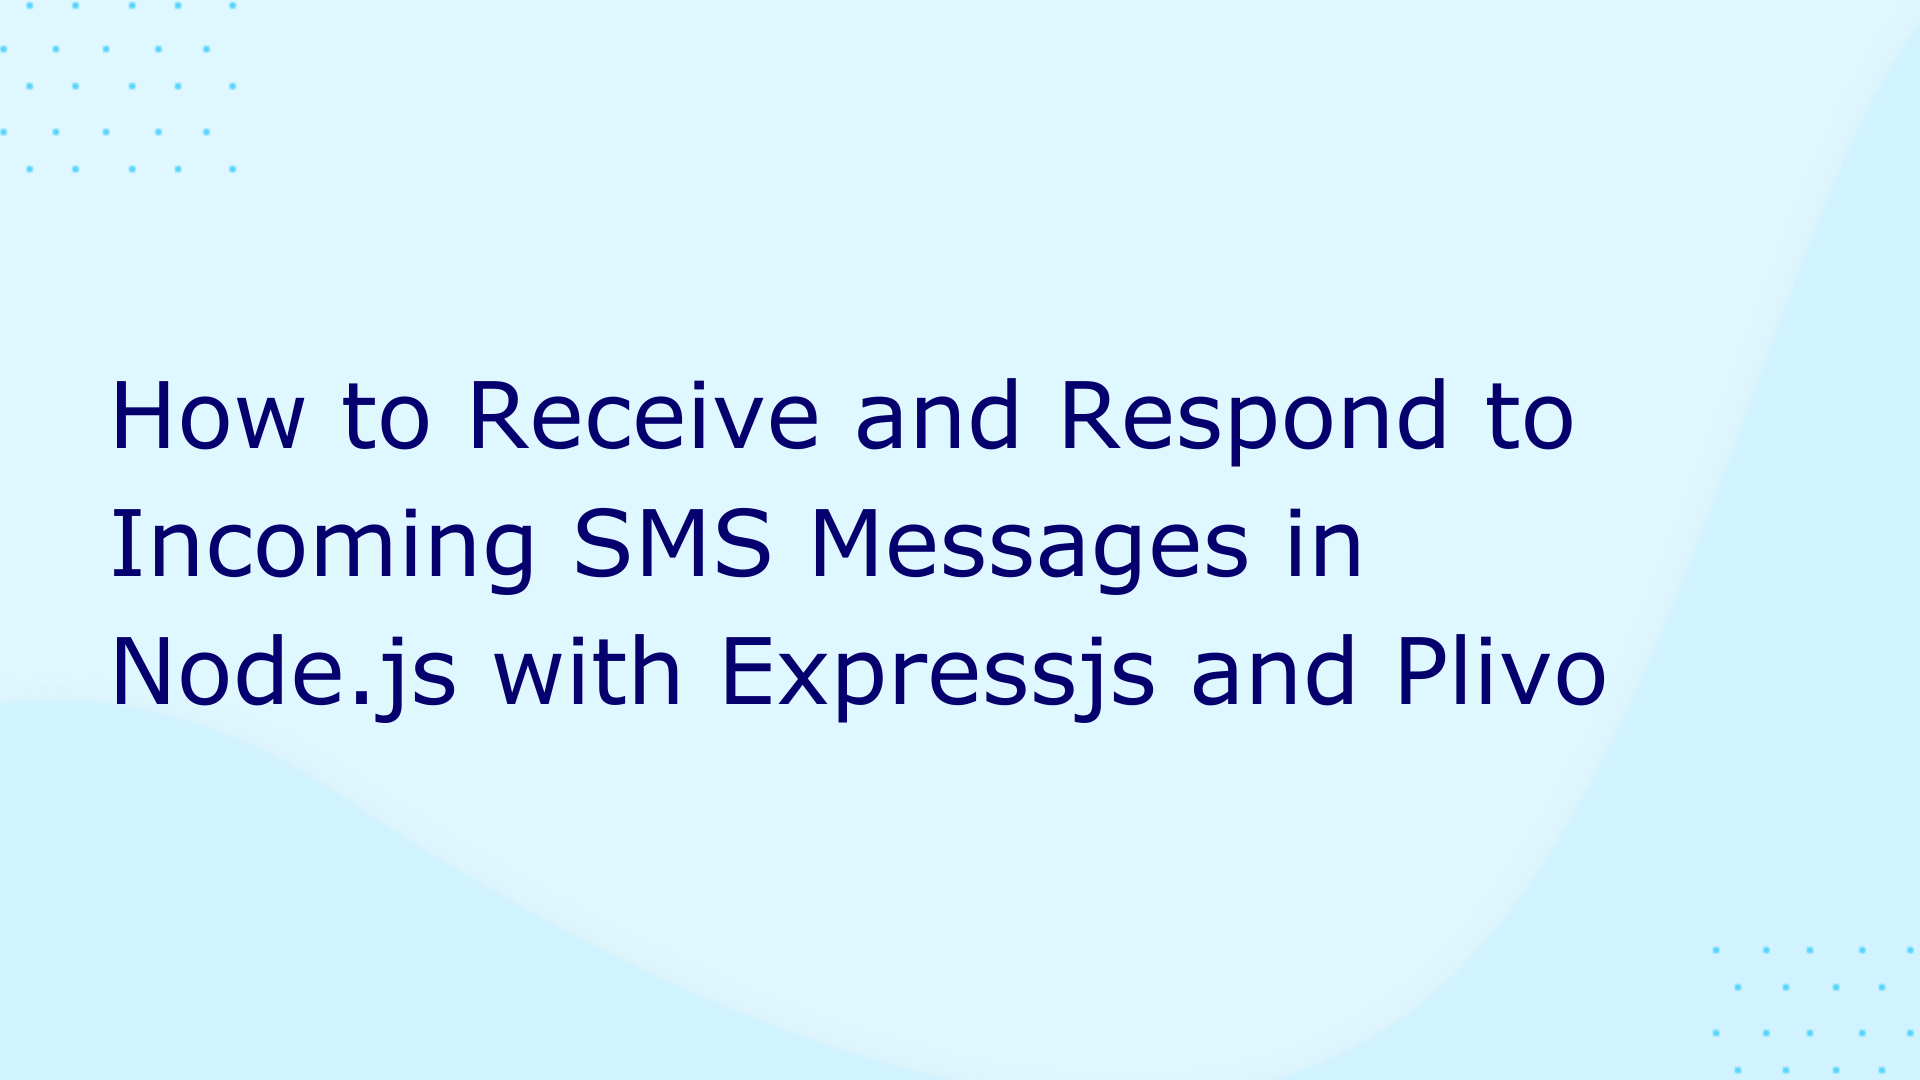 How to Receive and Respond to Incoming SMS Messages in Node.js with Express.js and Plivo